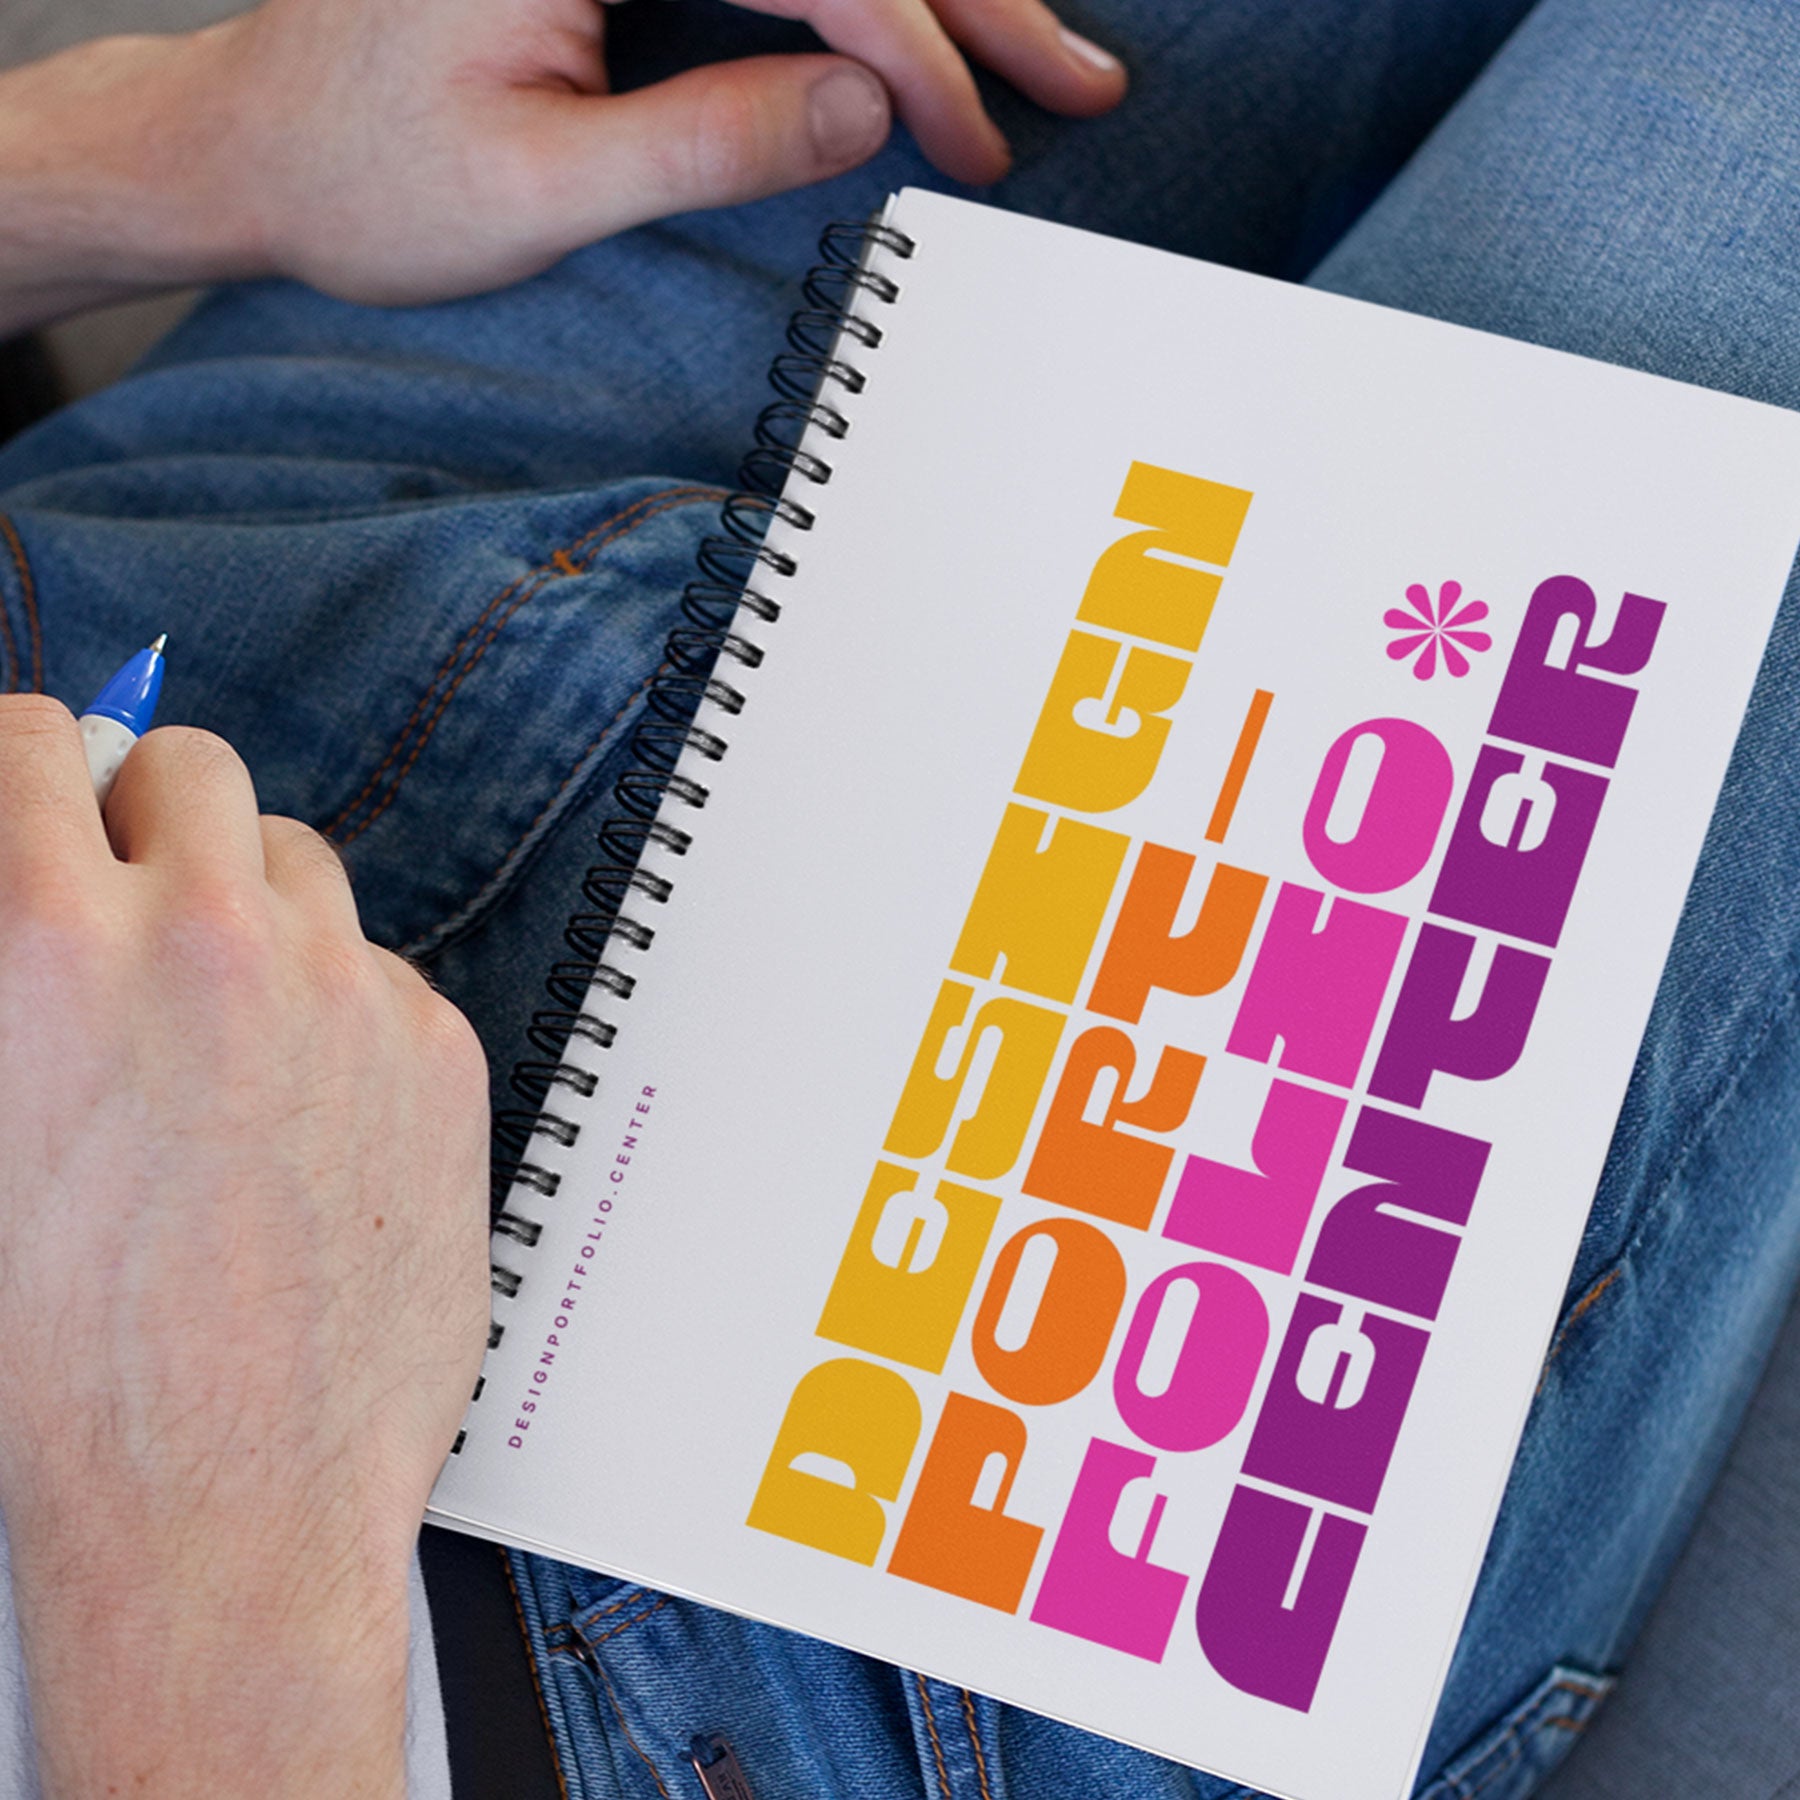 White notebook that has colorful cover showing yellow, orange, pink, and purple typography.